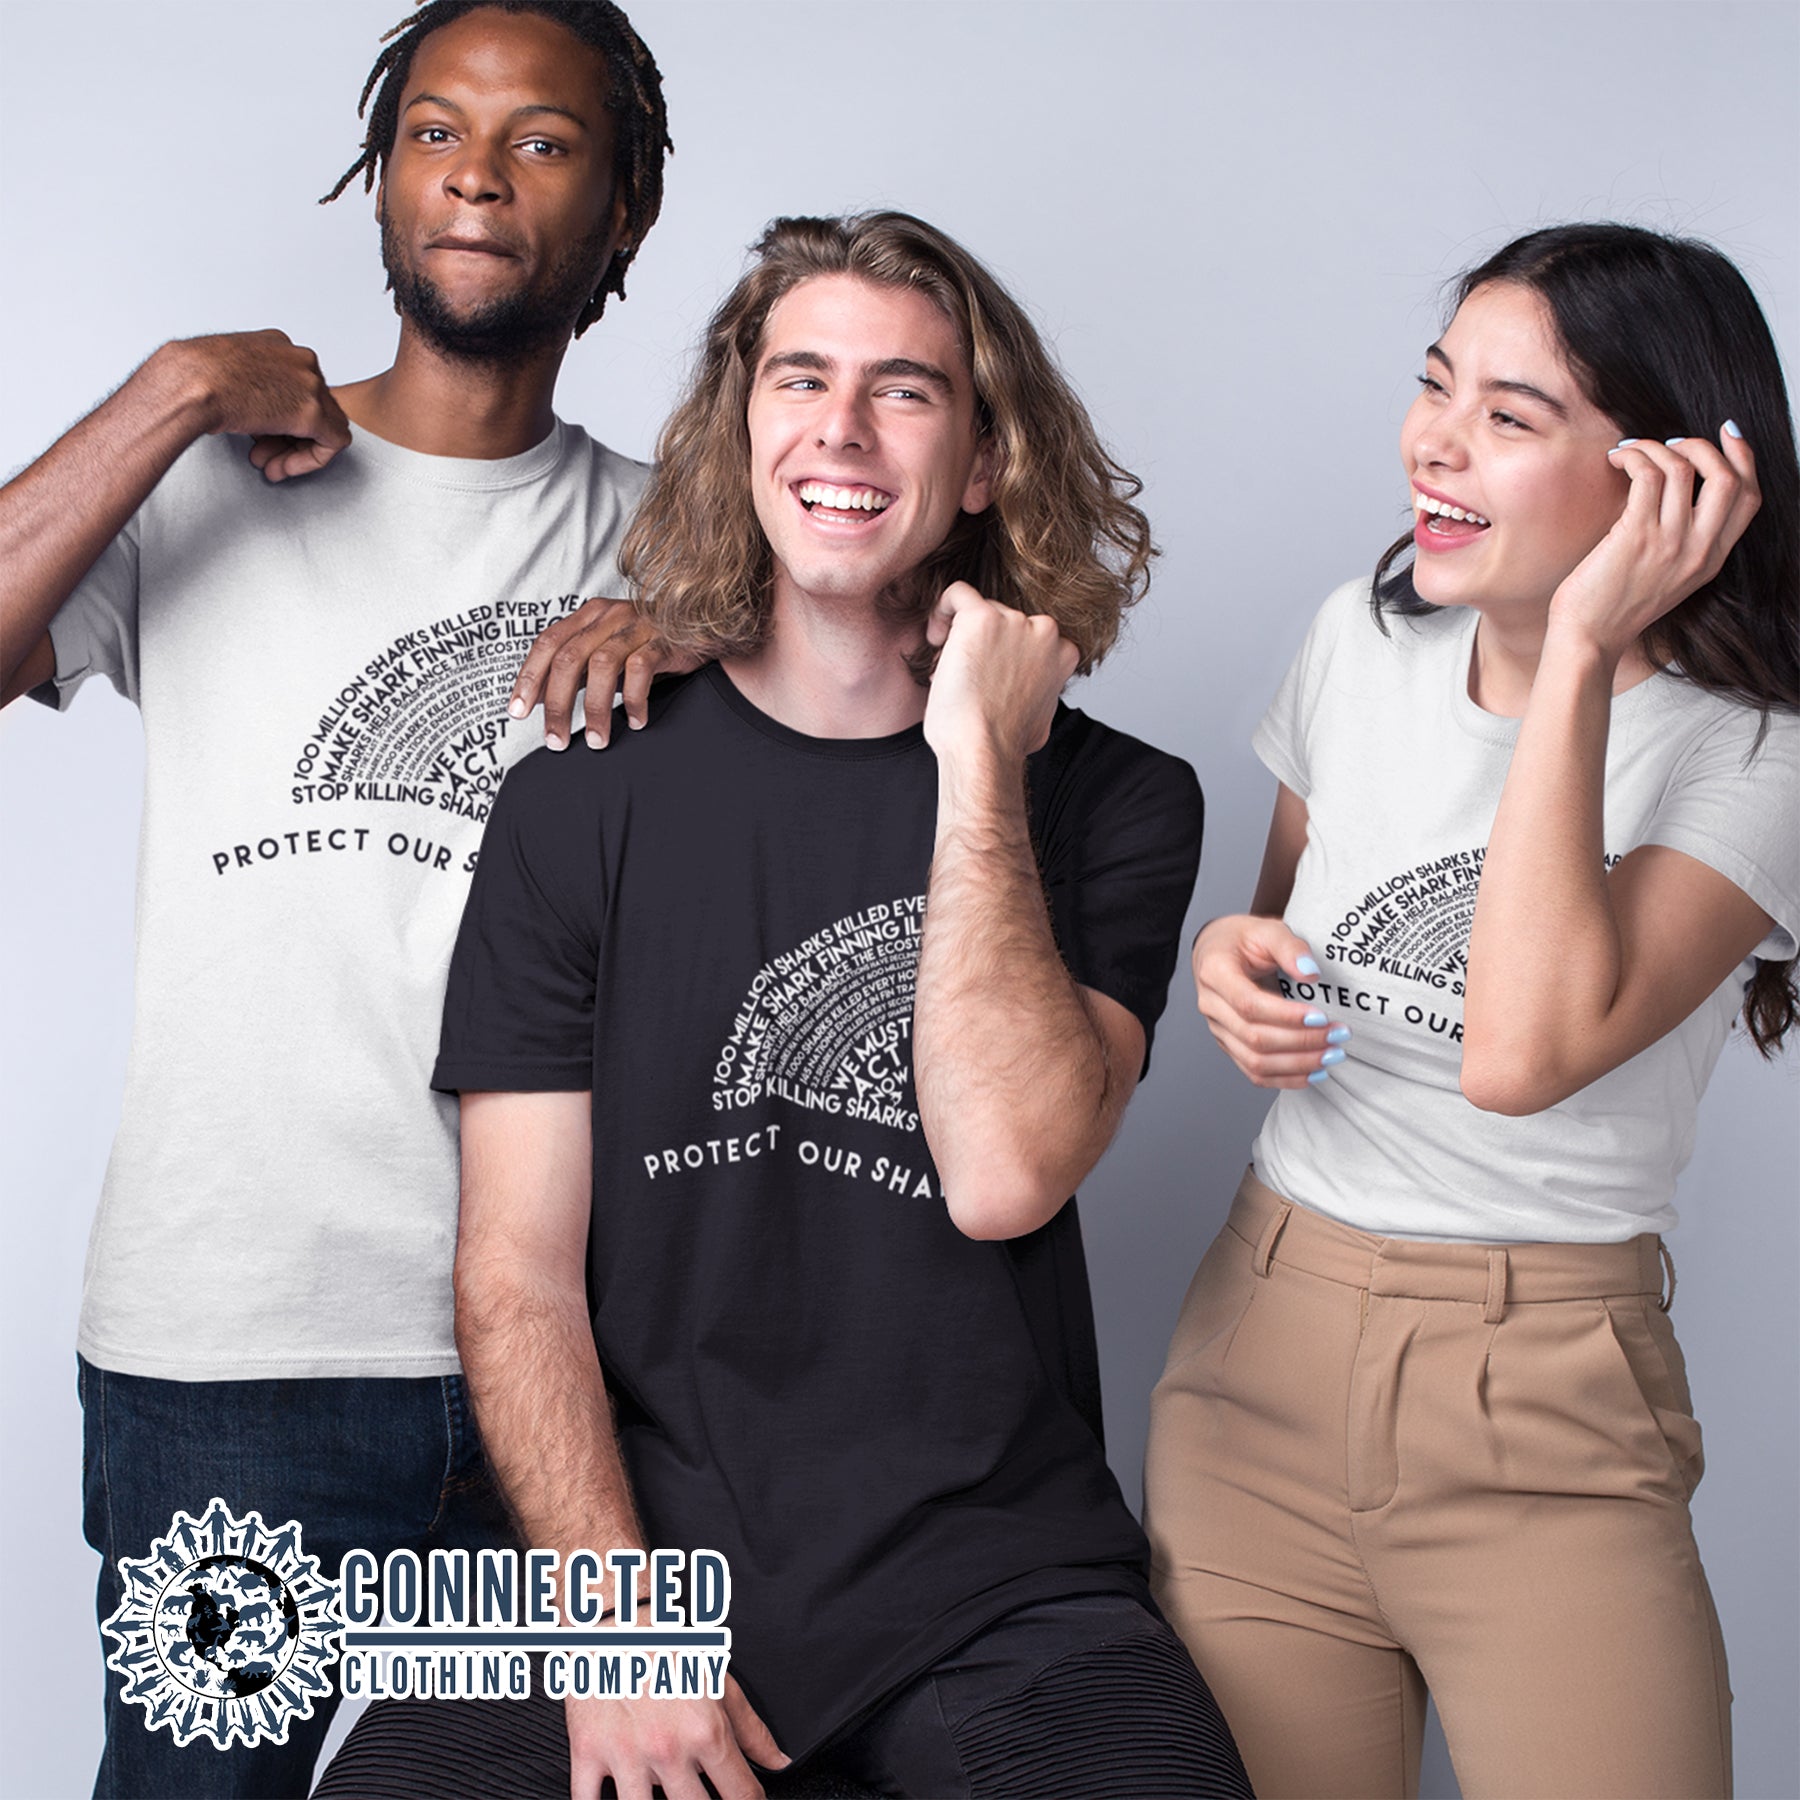 Black and White Protect Our Sharks Short-Sleeve Tees - getpinkfit - Ethically and Sustainably Made - 10% of profits donated to shark conservation and ocean conservation